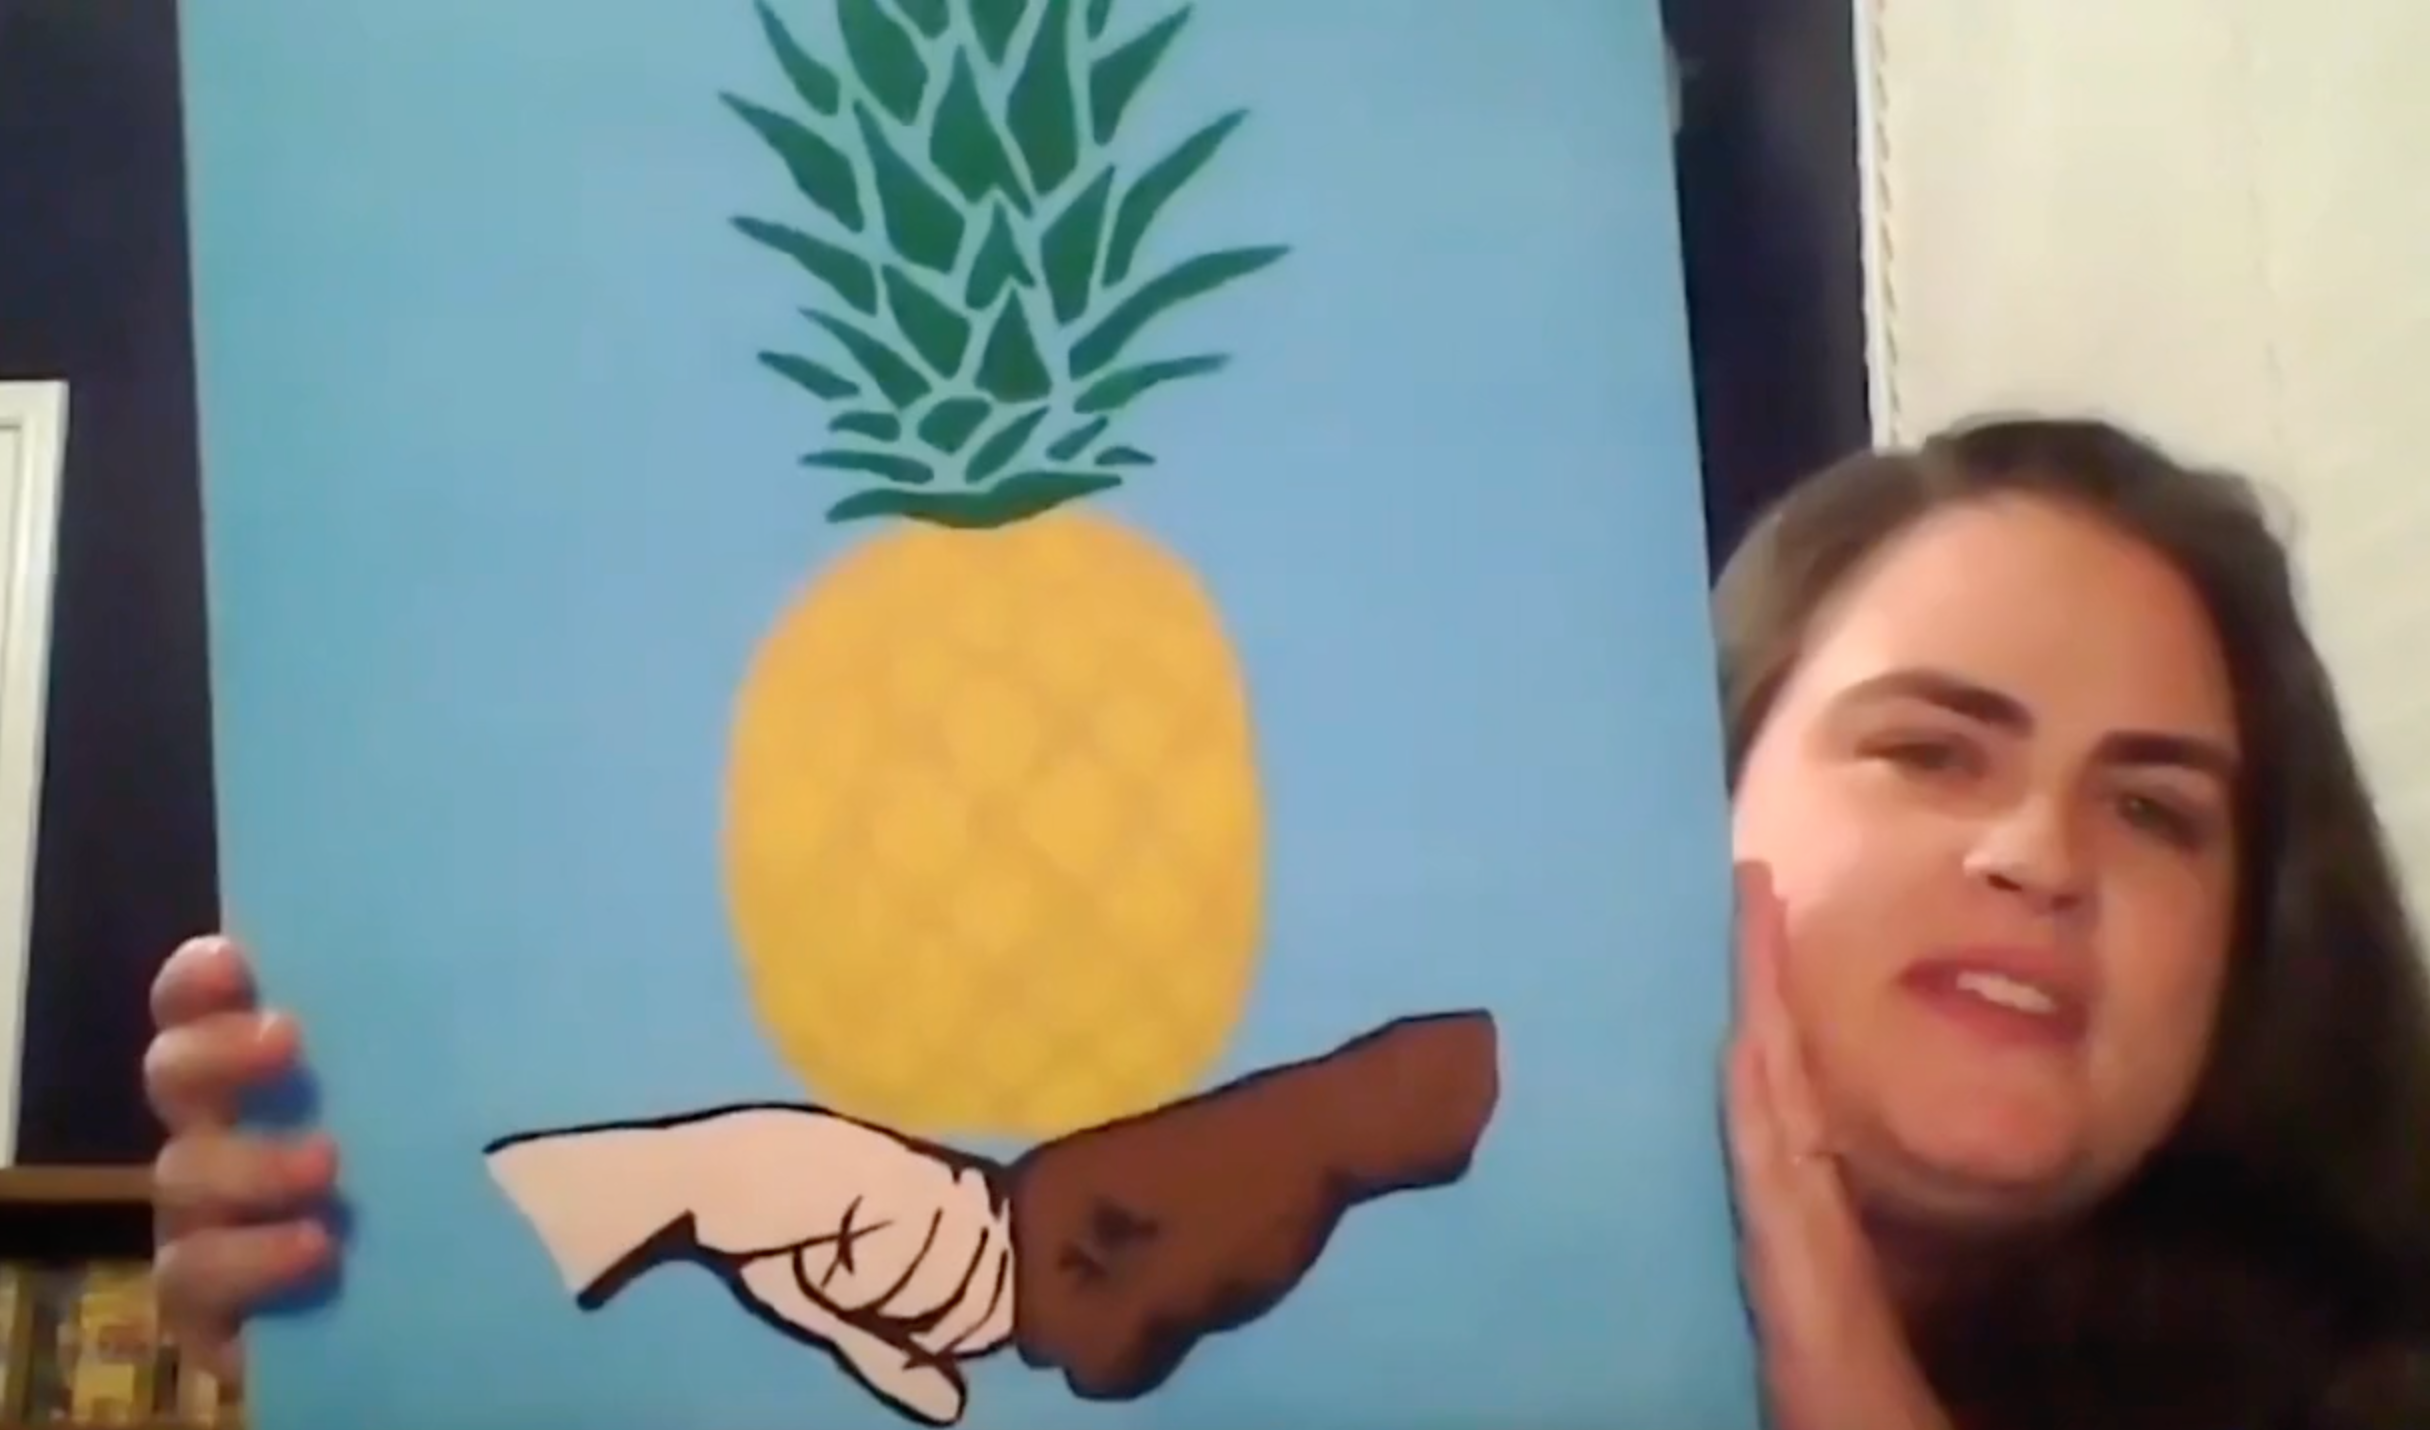 A &quot;Psych&quot; painting of a pineapple above a fist bump from Gus and Shawn.